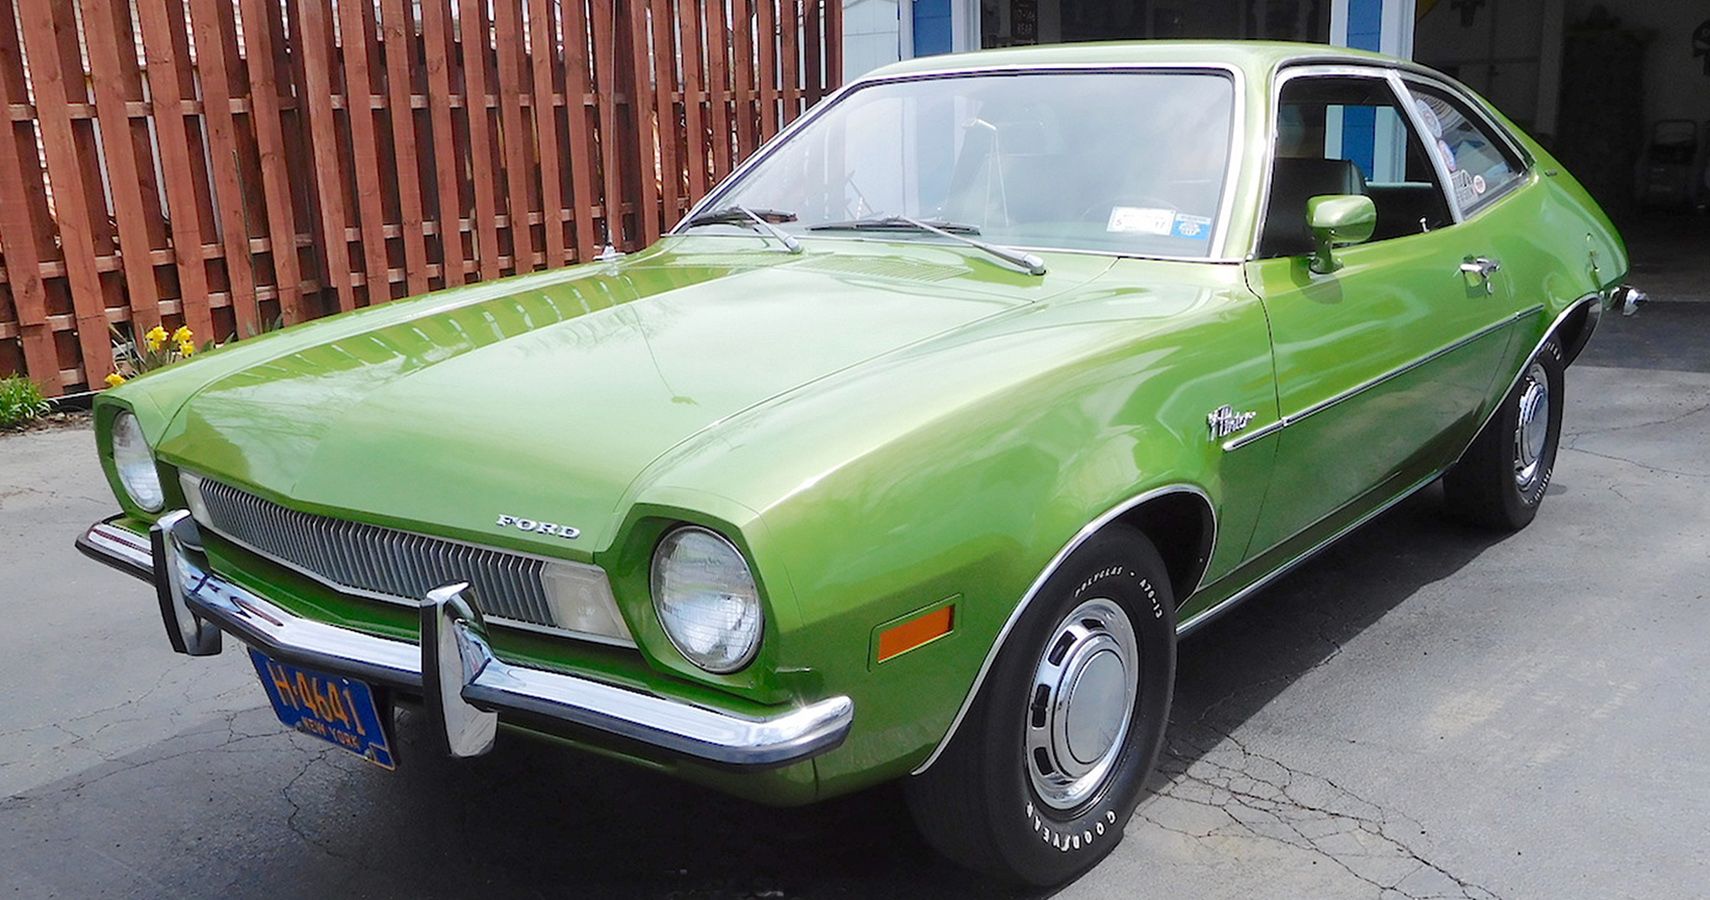 10 Things You Didn't Know About The Ford Pinto